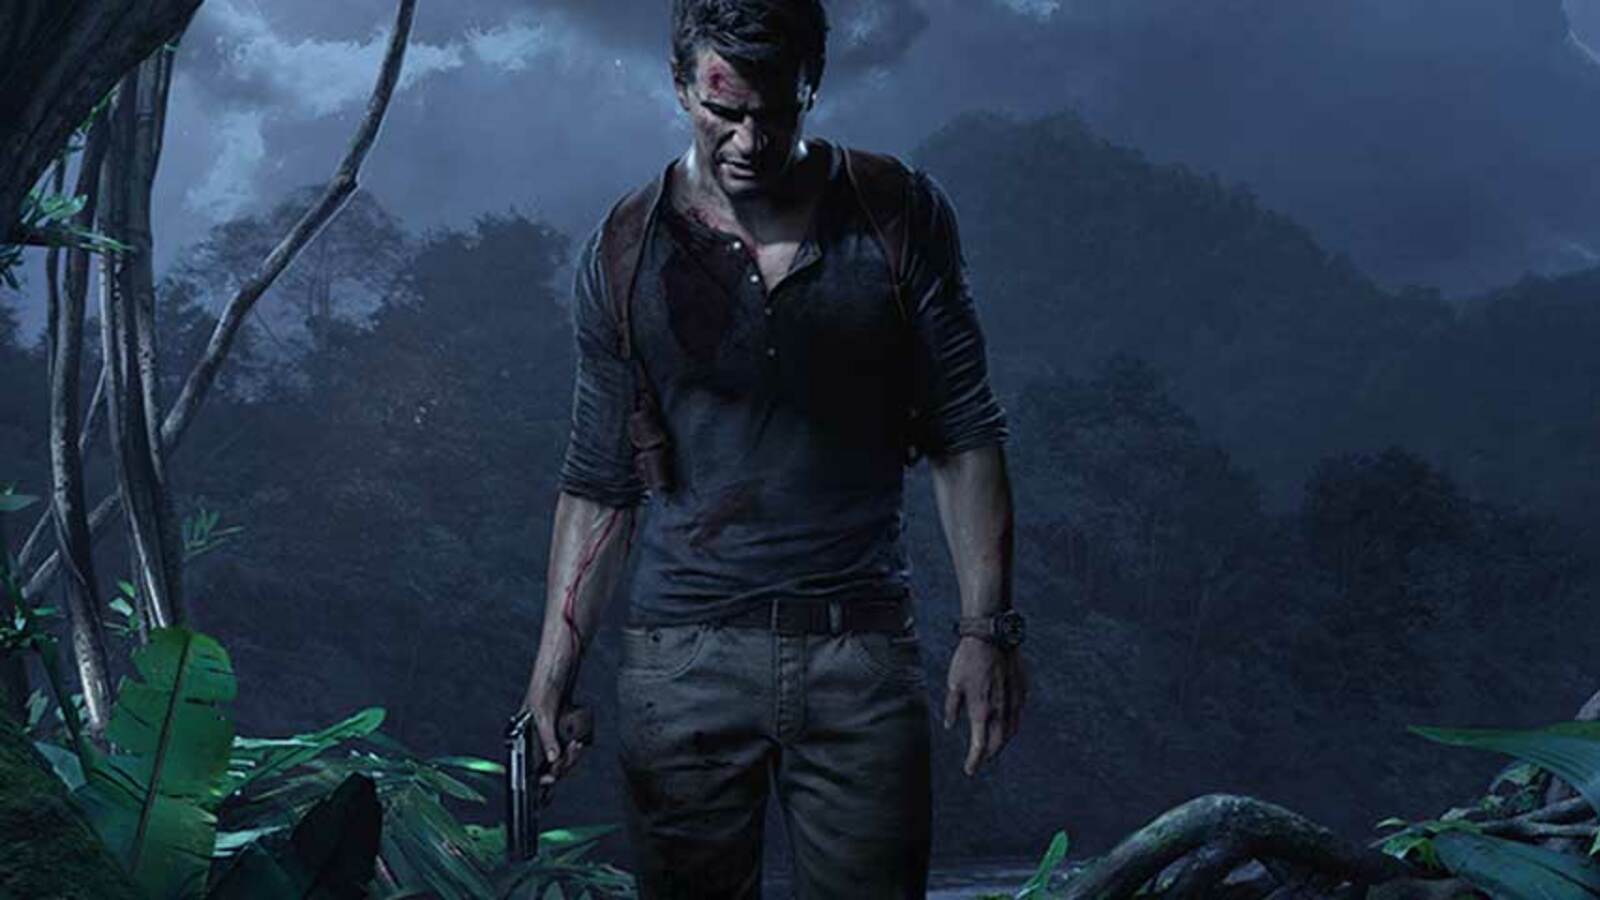 Uncharted 4 A Thiefs End action and gameplay discussed by